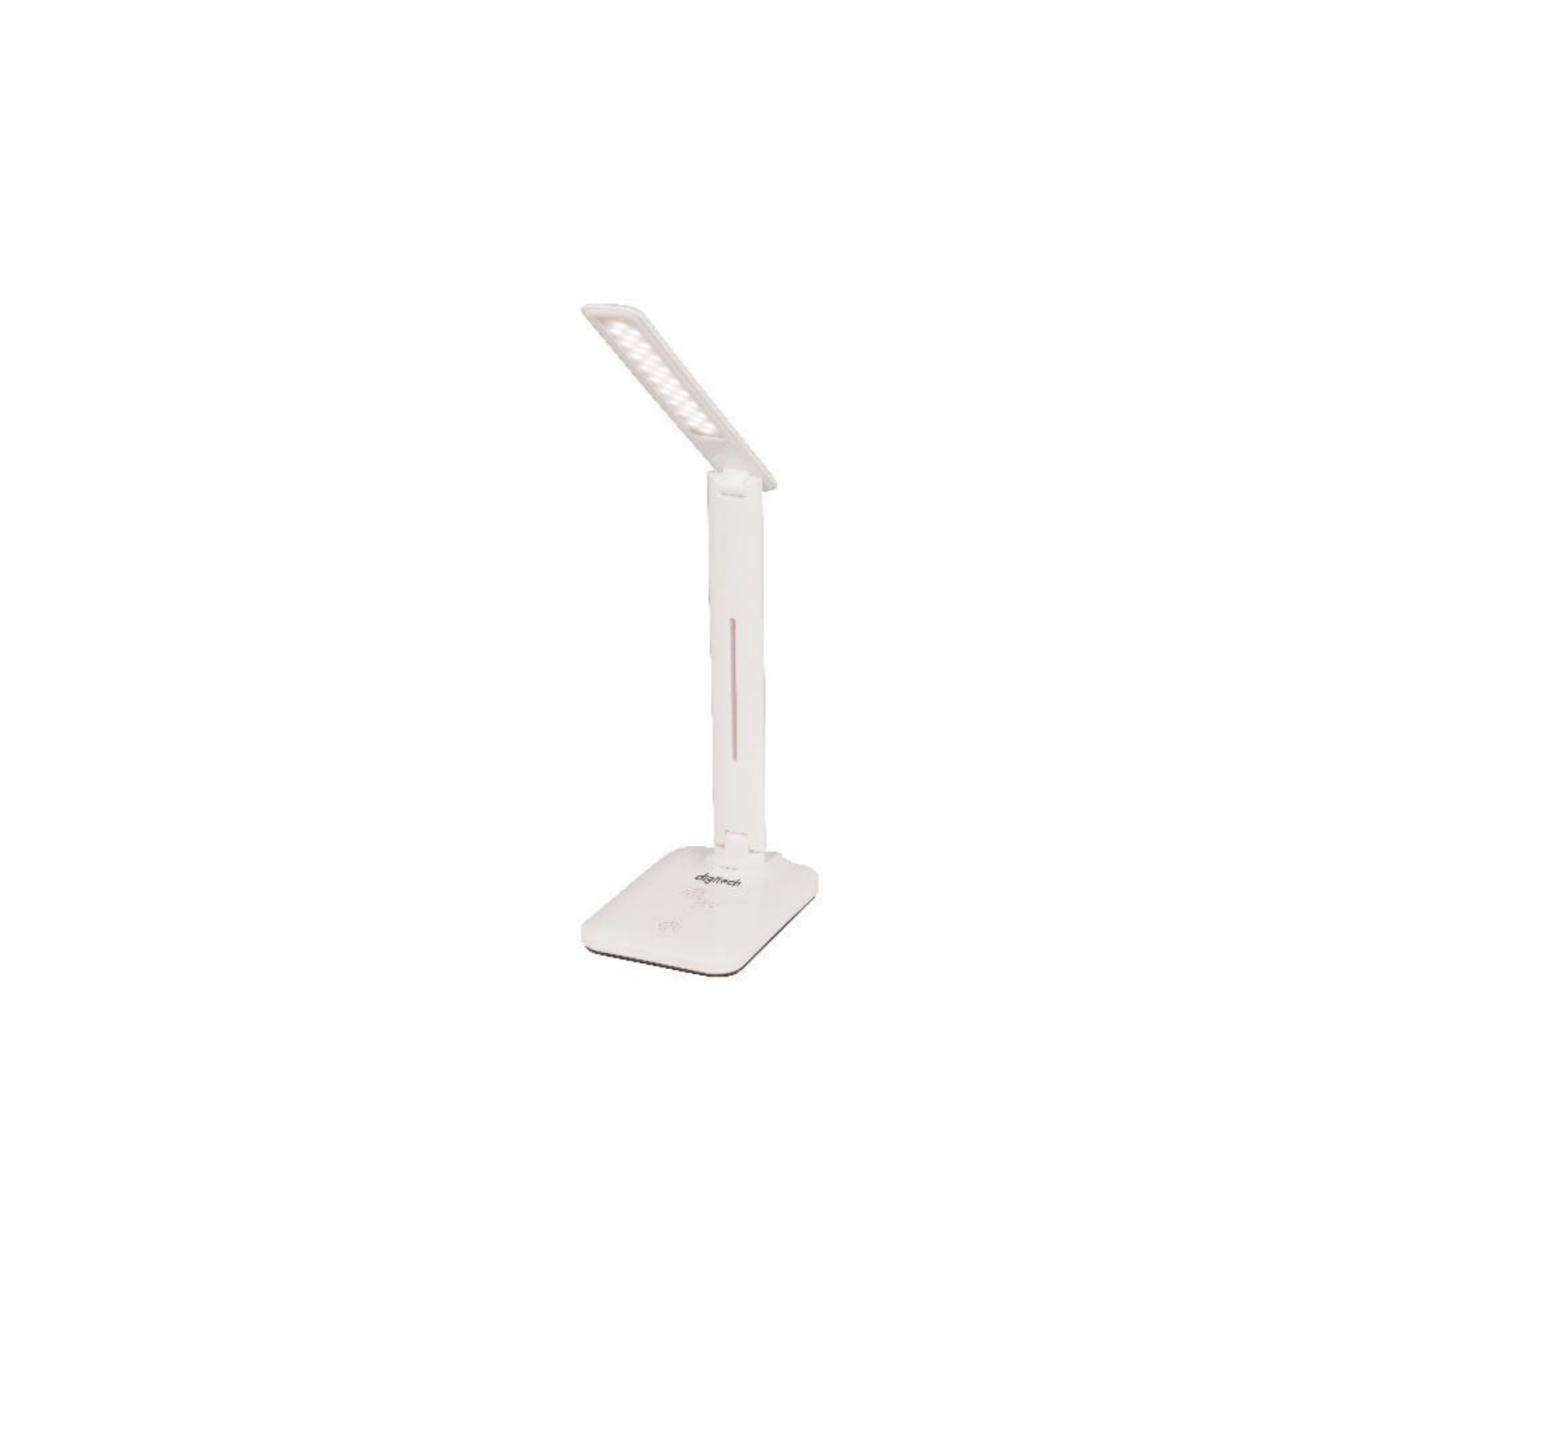 DIGITECH SL-3150 LED Desk Lamp with Qi Wireless Charging User Manual